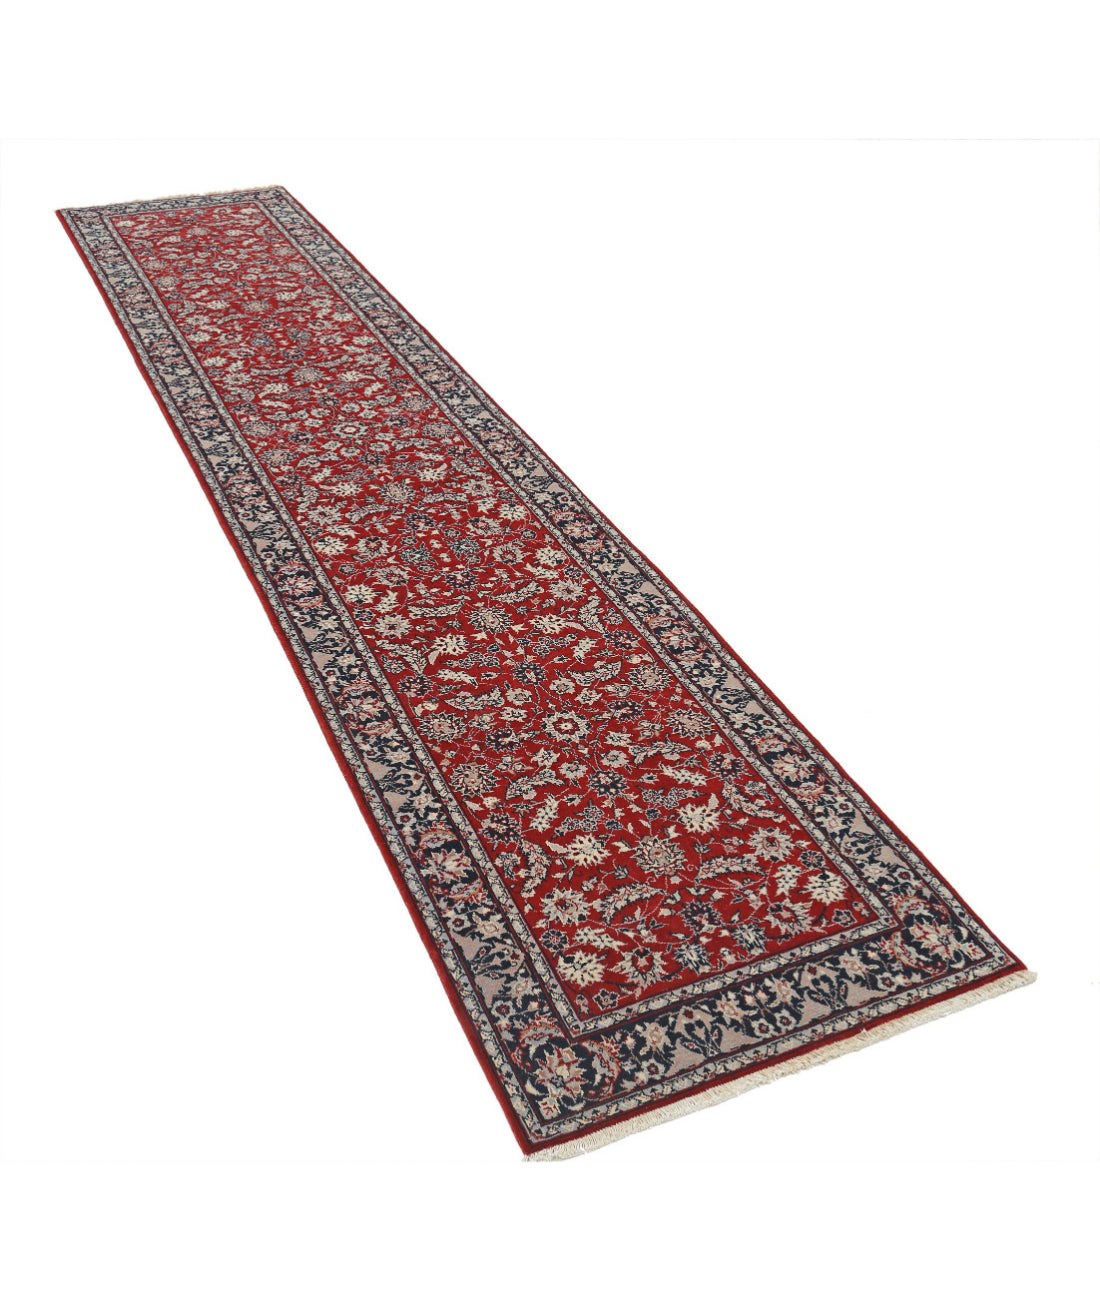 Heritage 2'6'' X 12'1'' Hand-Knotted Wool Rug 2'6'' x 12'1'' (75 X 363) / Red / Blue